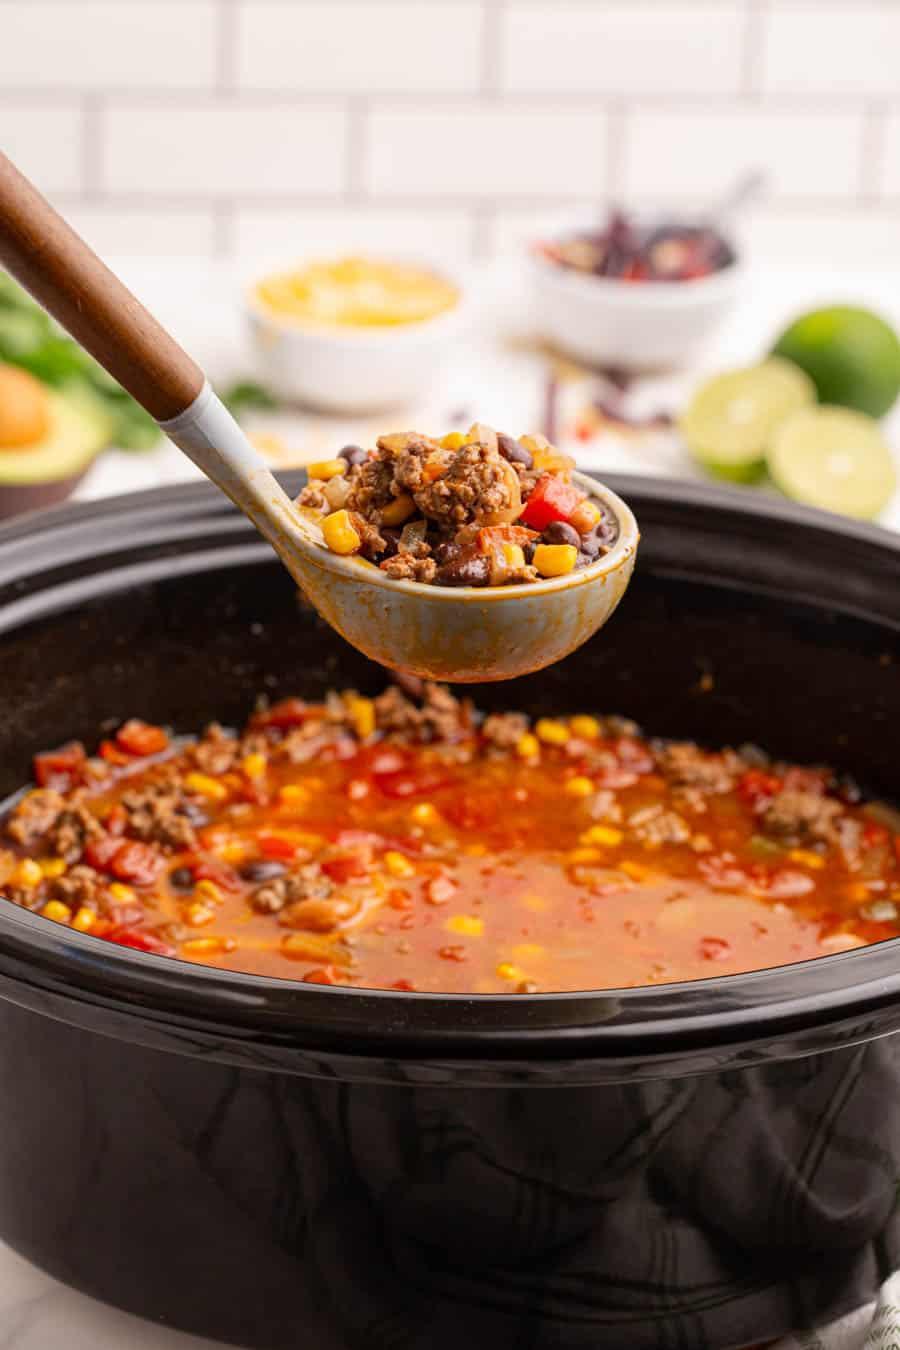 https://www.blessthismessplease.com/wp-content/uploads/2022/11/slow-cooker-taco-soup-recipe-15-of-45.jpg